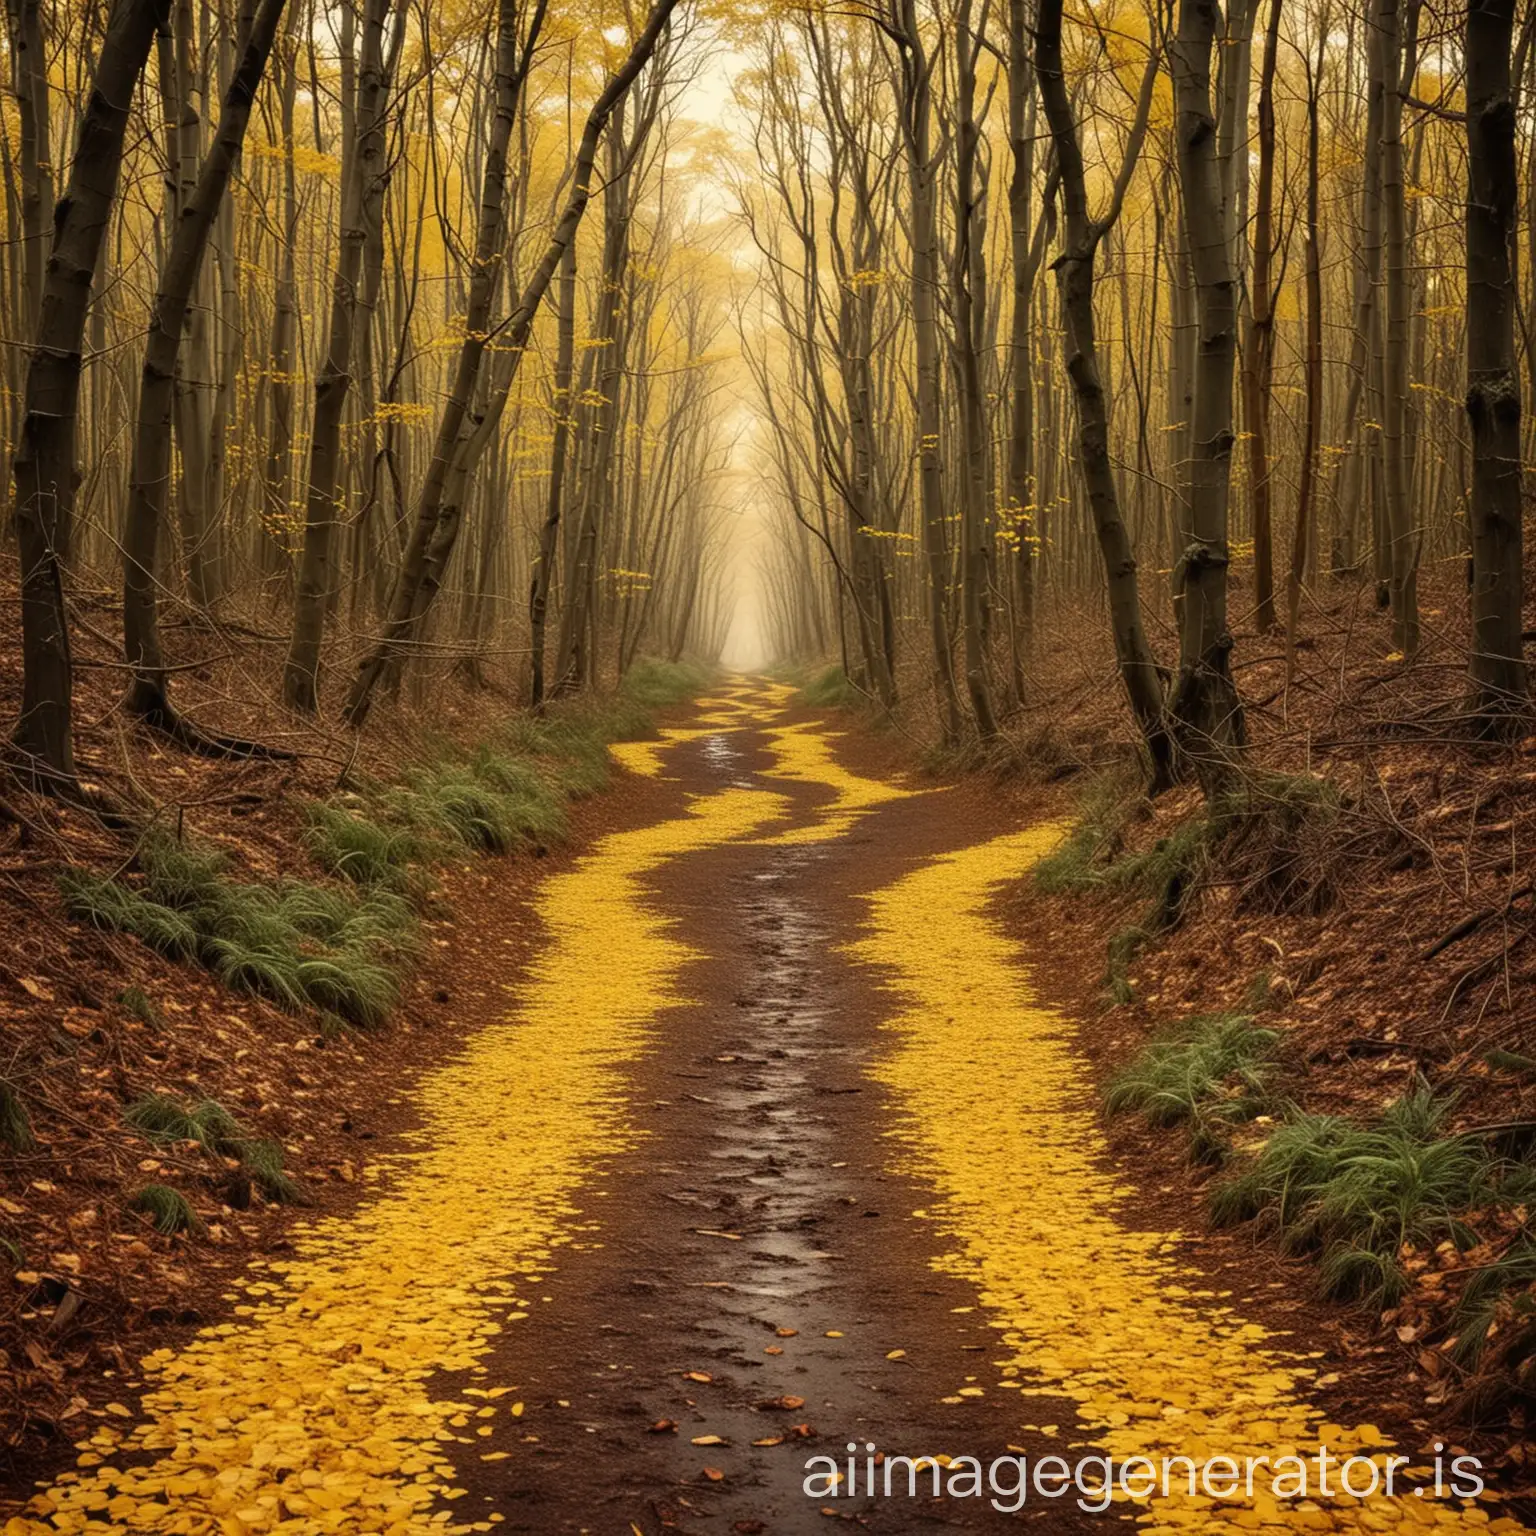 Decision-at-Crossroads-in-a-Yellow-Wood